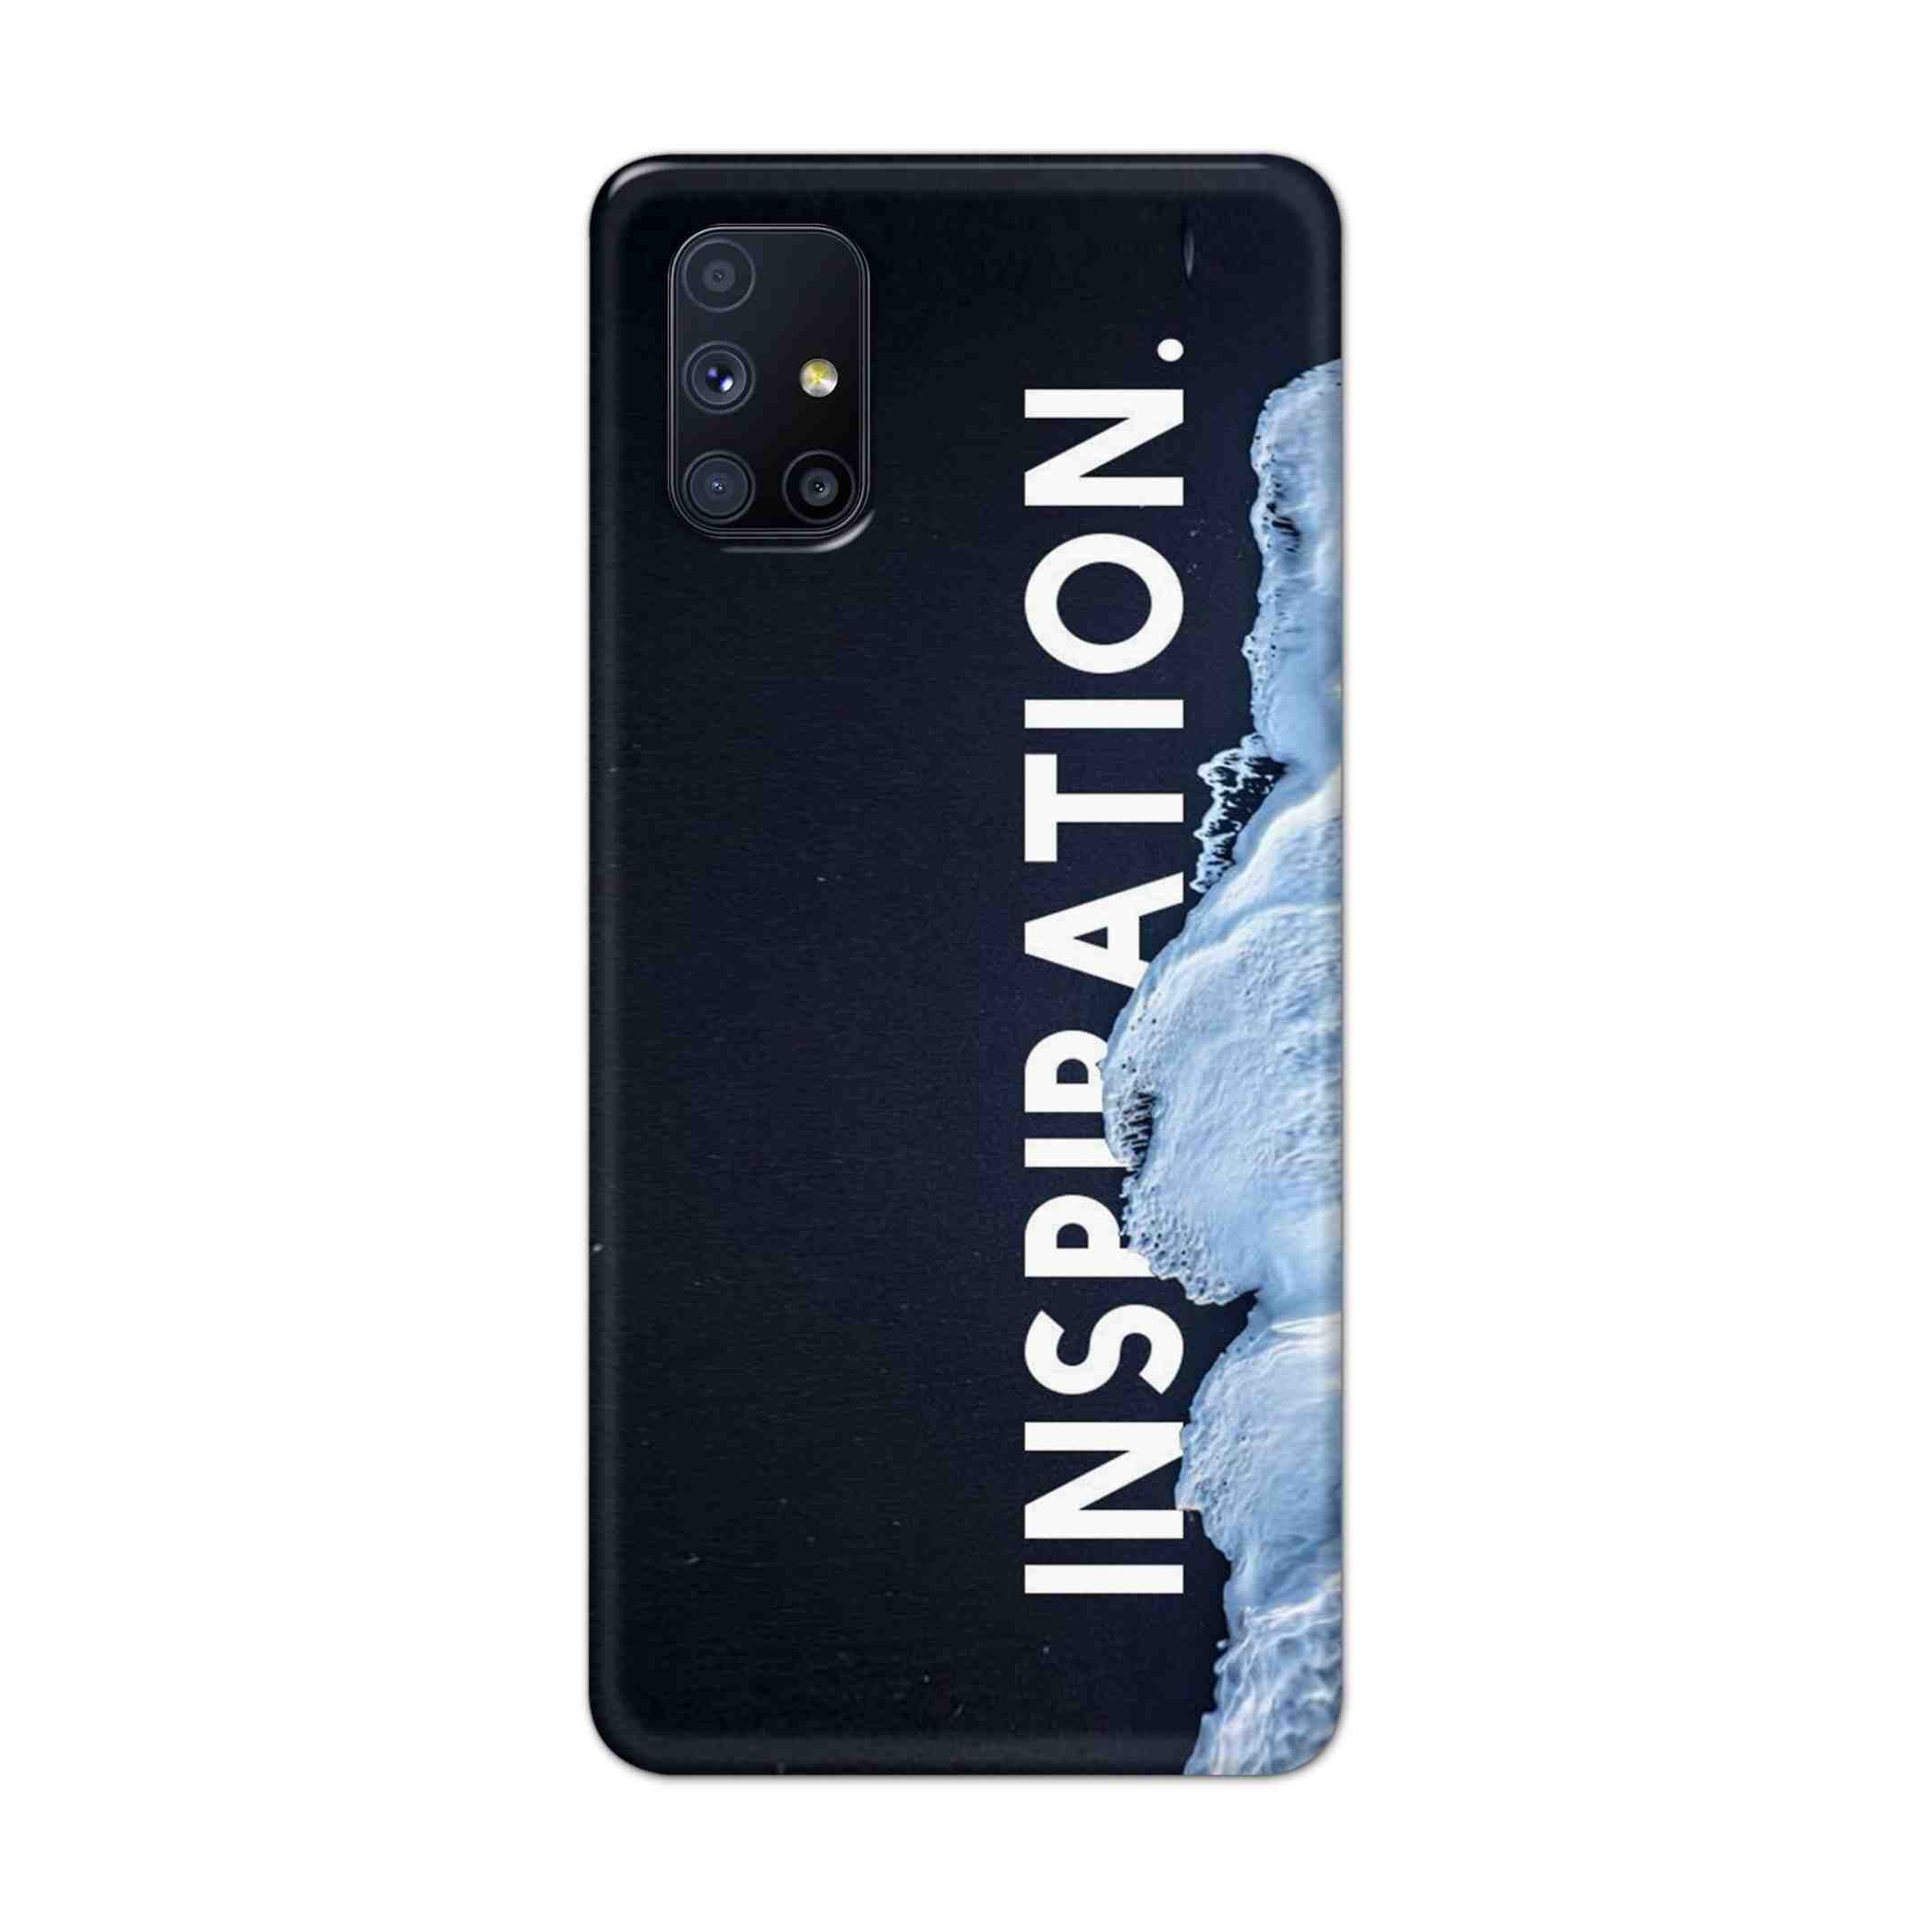 Buy Inspiration Hard Back Mobile Phone Case Cover For Samsung Galaxy M51 Online